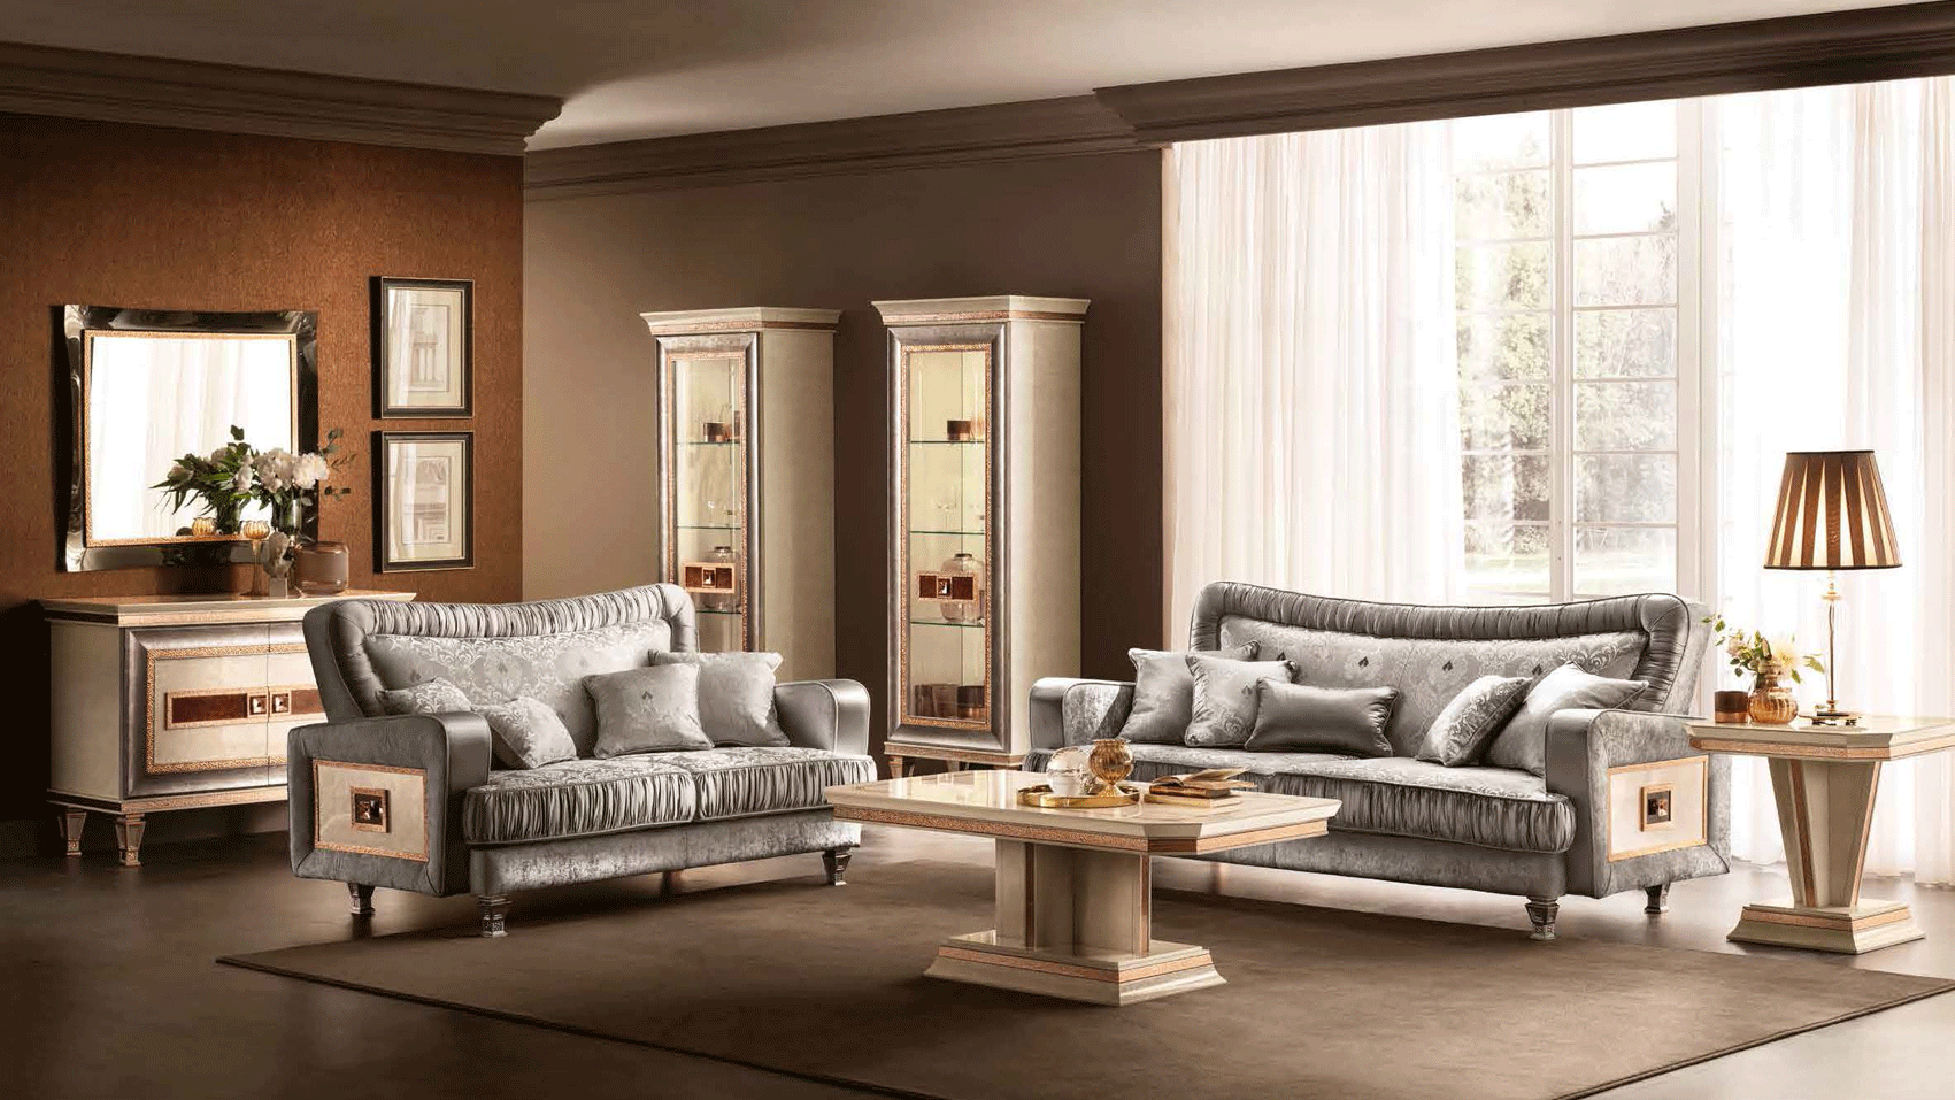 Living Room Furniture Sofas Loveseats and Chairs Dolce Vita